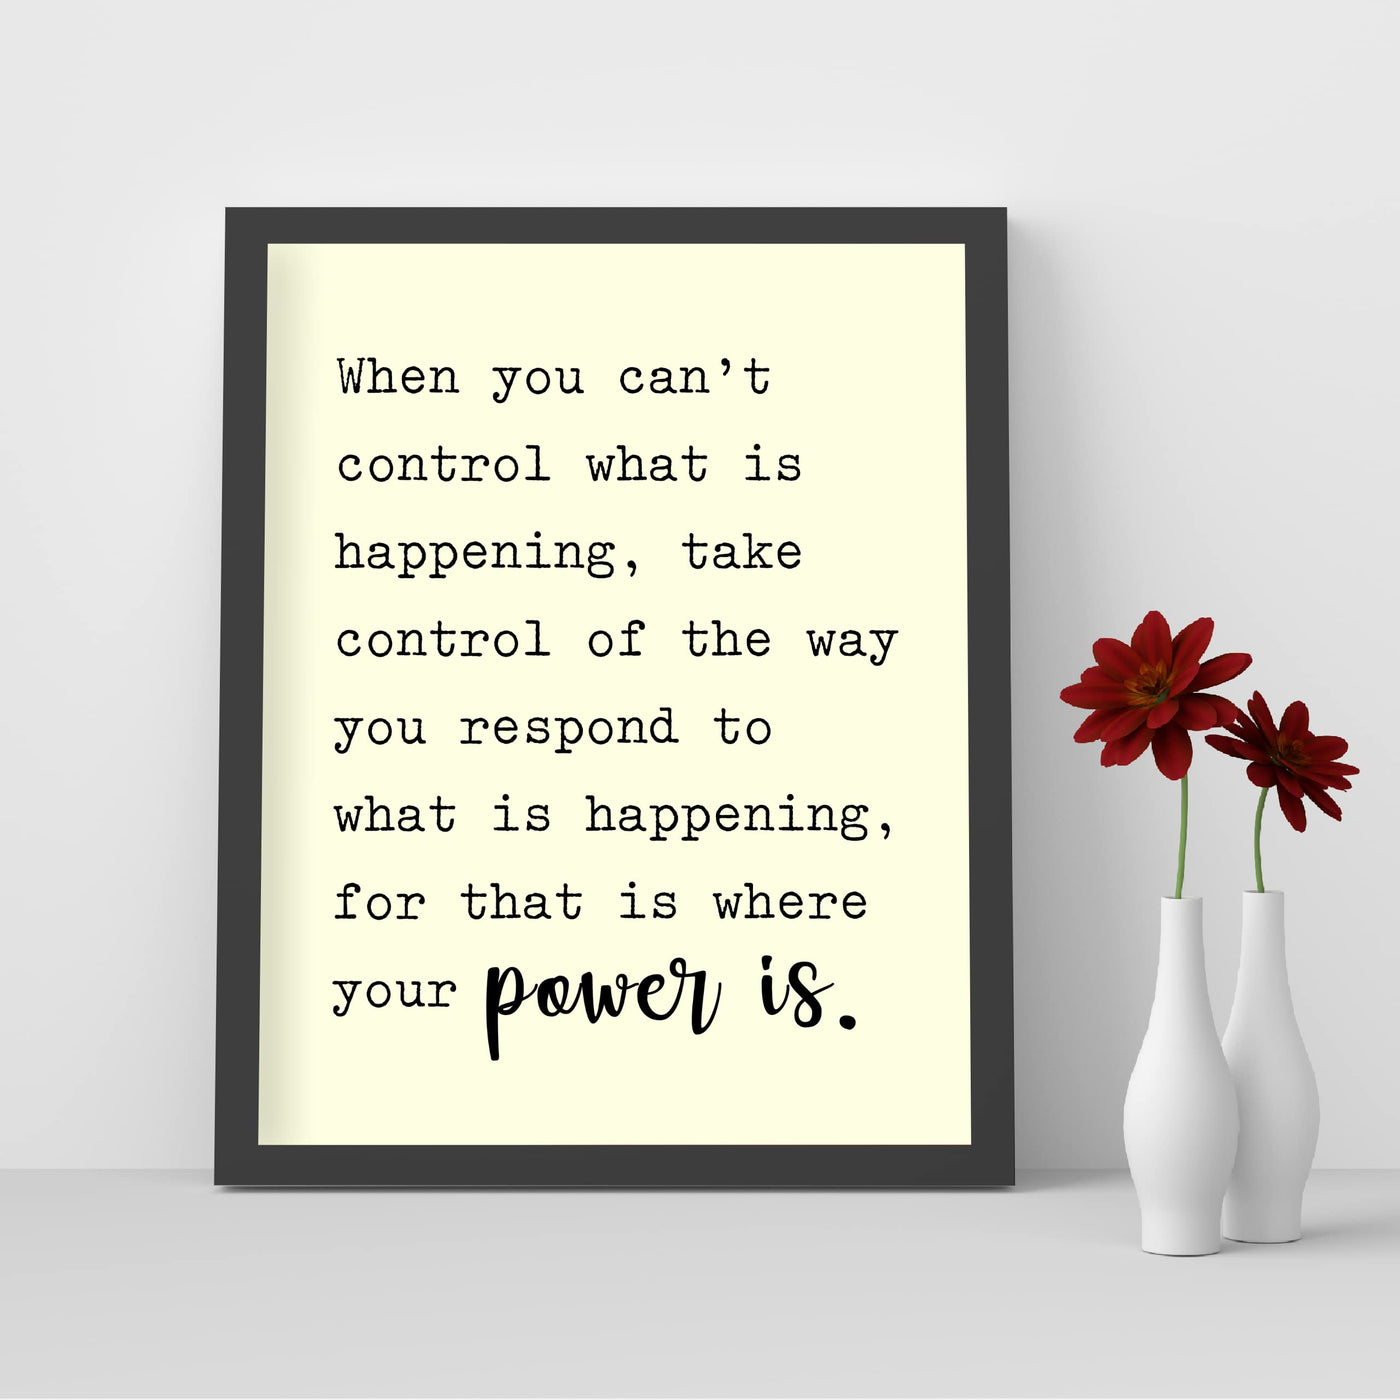 Control the Way You Respond-Where Your Power Is Motivational Quotes Wall Art -8 x 10" Modern Inspirational Wall Print -Ready to Frame. Home-Studio-Office-Zen-Meditation Decor. Great Classroom Sign!